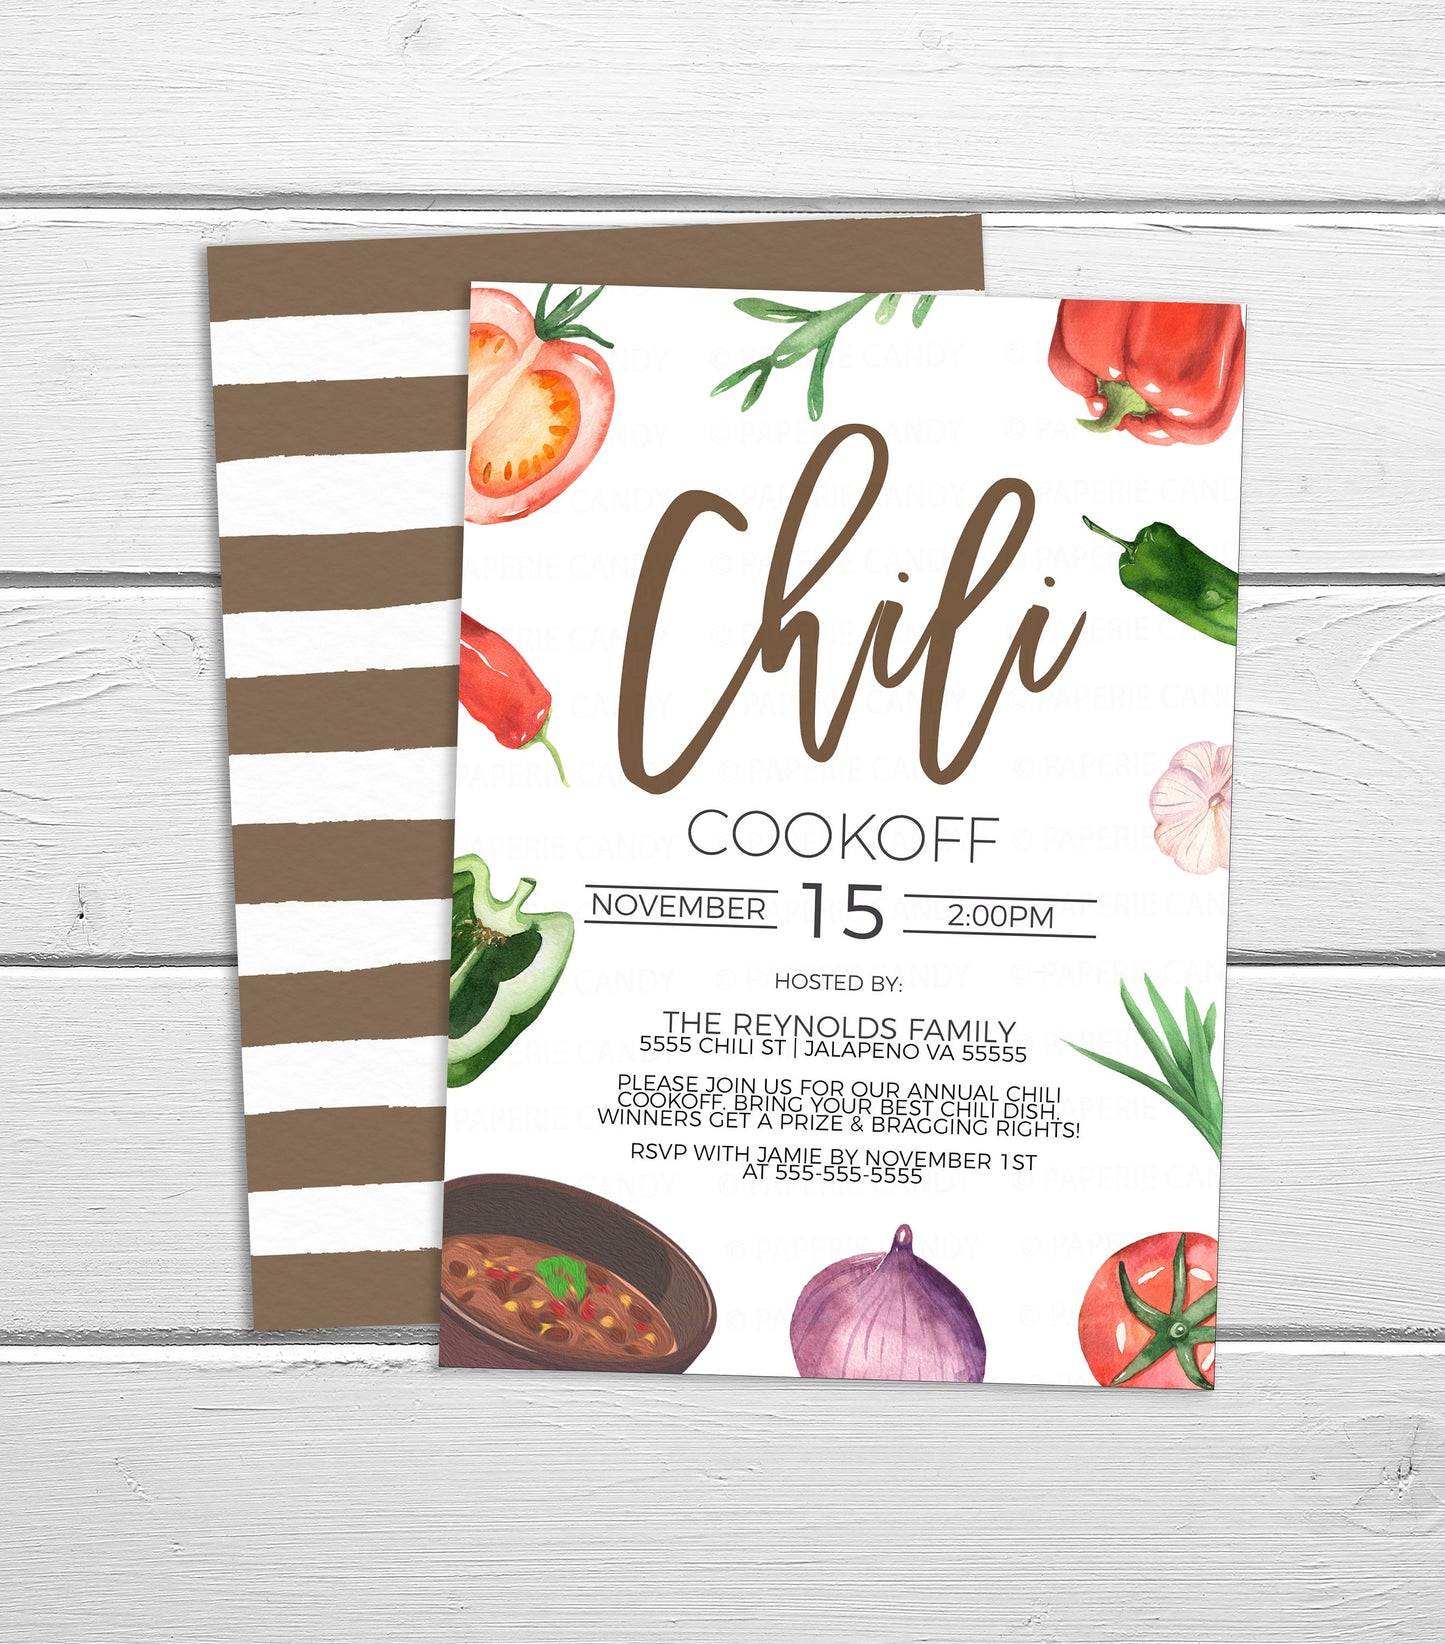 Chili Cook Off Invitation, Annual Chili Cook-off Tasting Competition Invite, Chili CookOff Party Flyer, Printable Editable Template